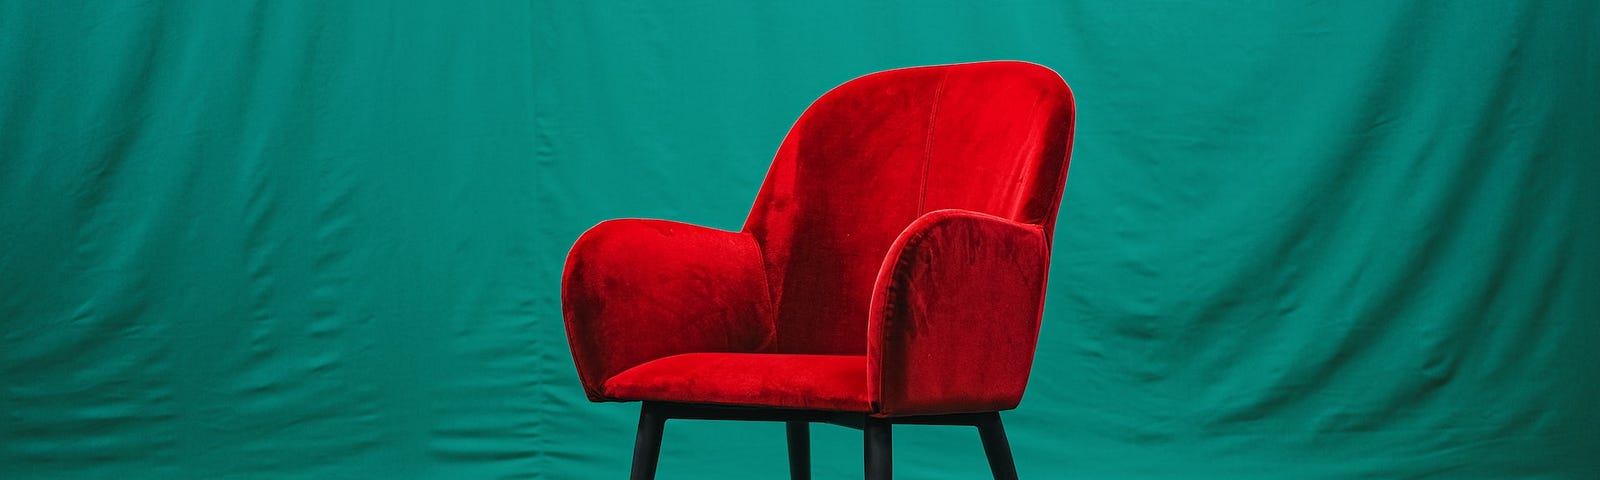 A red velvet chair with arms on a dark green floor and backdrop